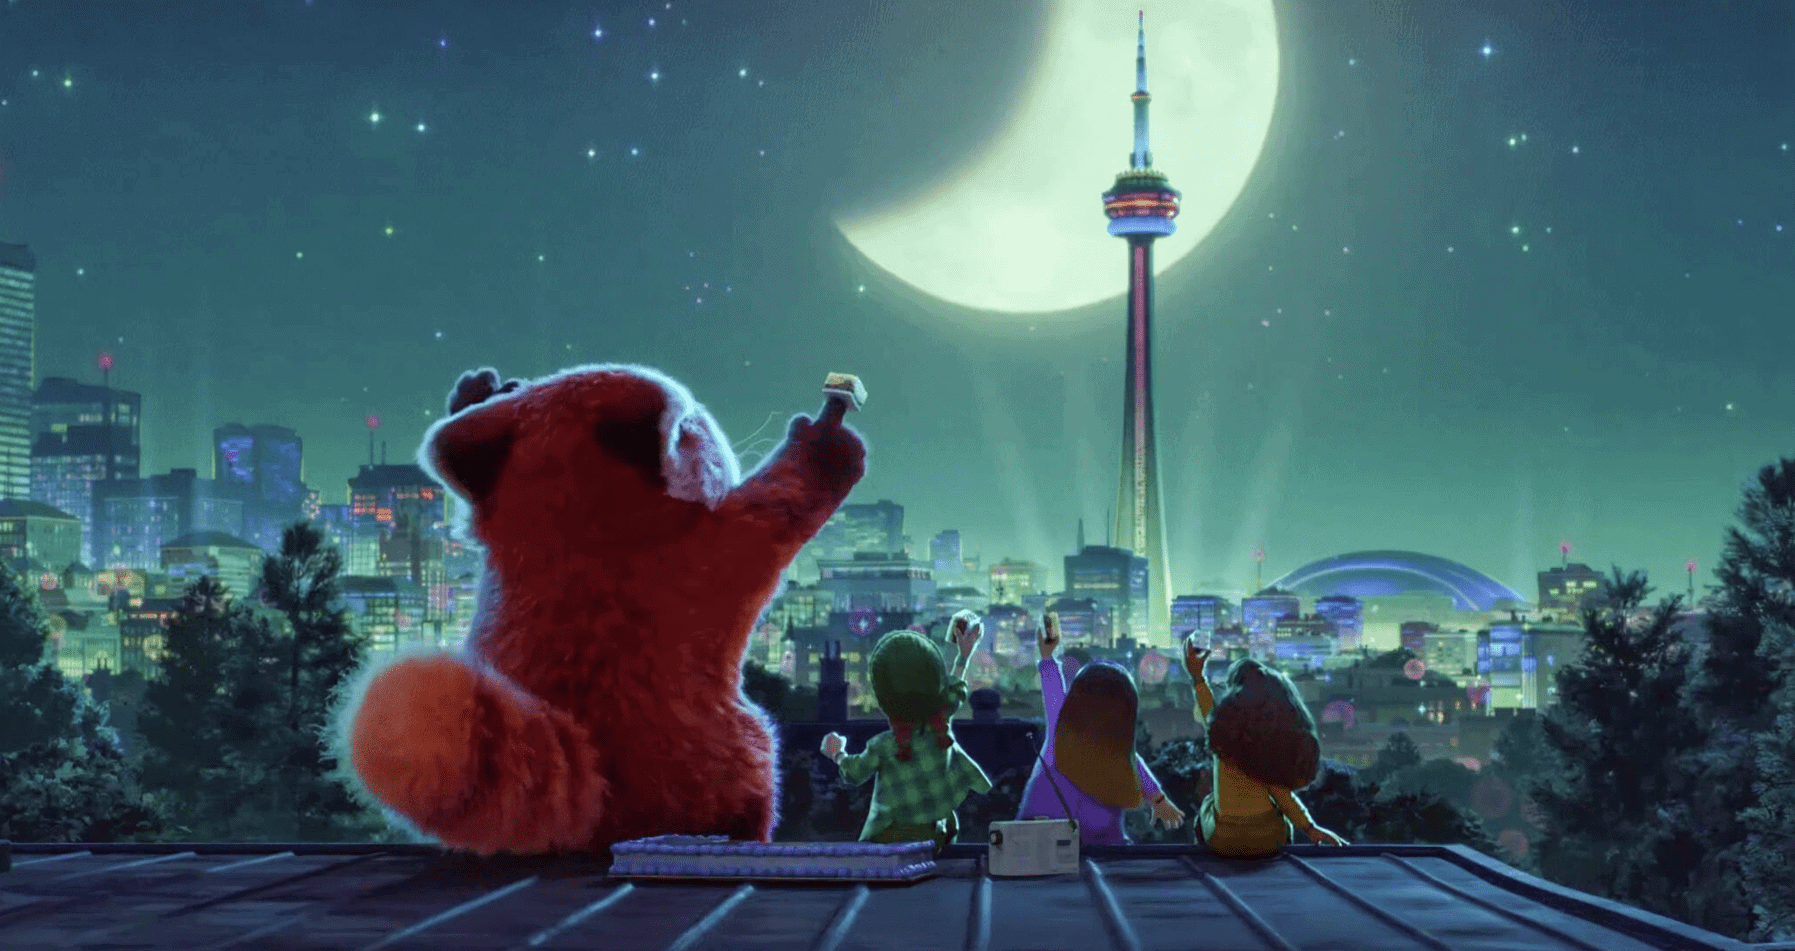 A giant red panda and three humans celebrate and look off into the busy cityscape in the distance in this image from Walt Disney Pictures.